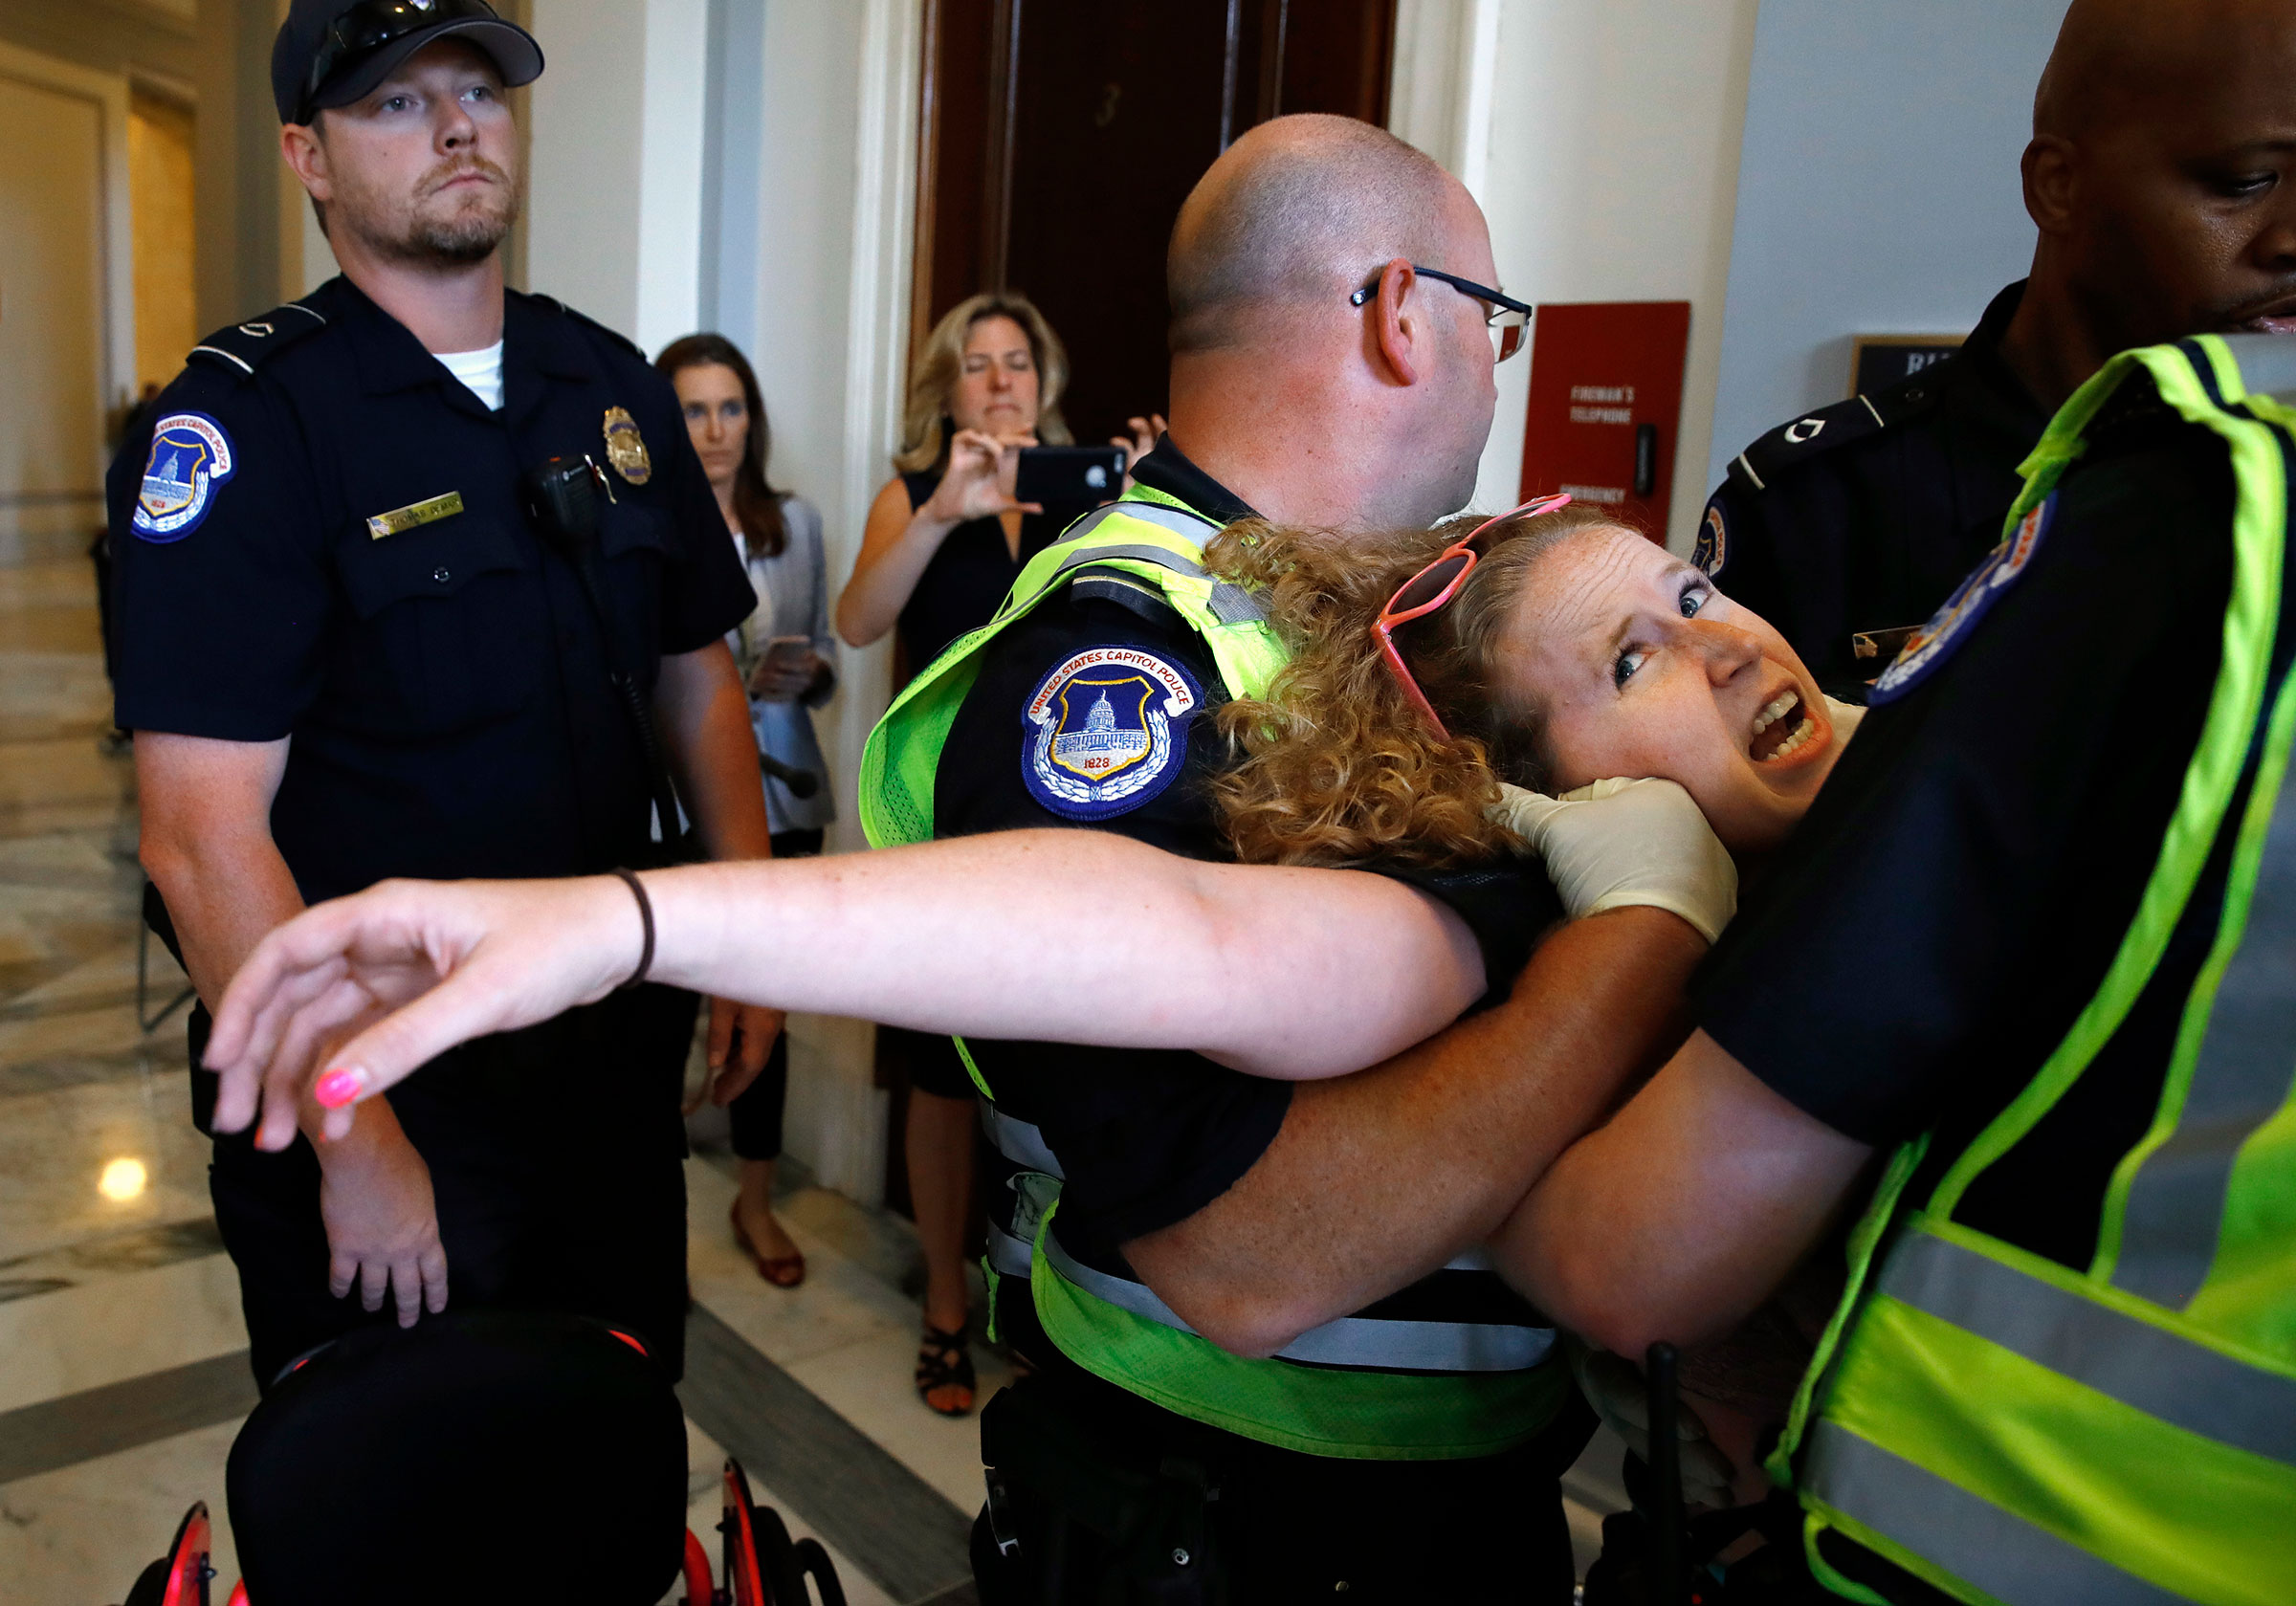 Stephanie Woodward, who has spina bifida and uses a wheelchair, is removed from a sit-in at Senate Majority Leader Mitch McConnell's office as she and other disability rights advocates protest proposed funding caps to Medicaid, on Capitol Hill on June 22, 2017.